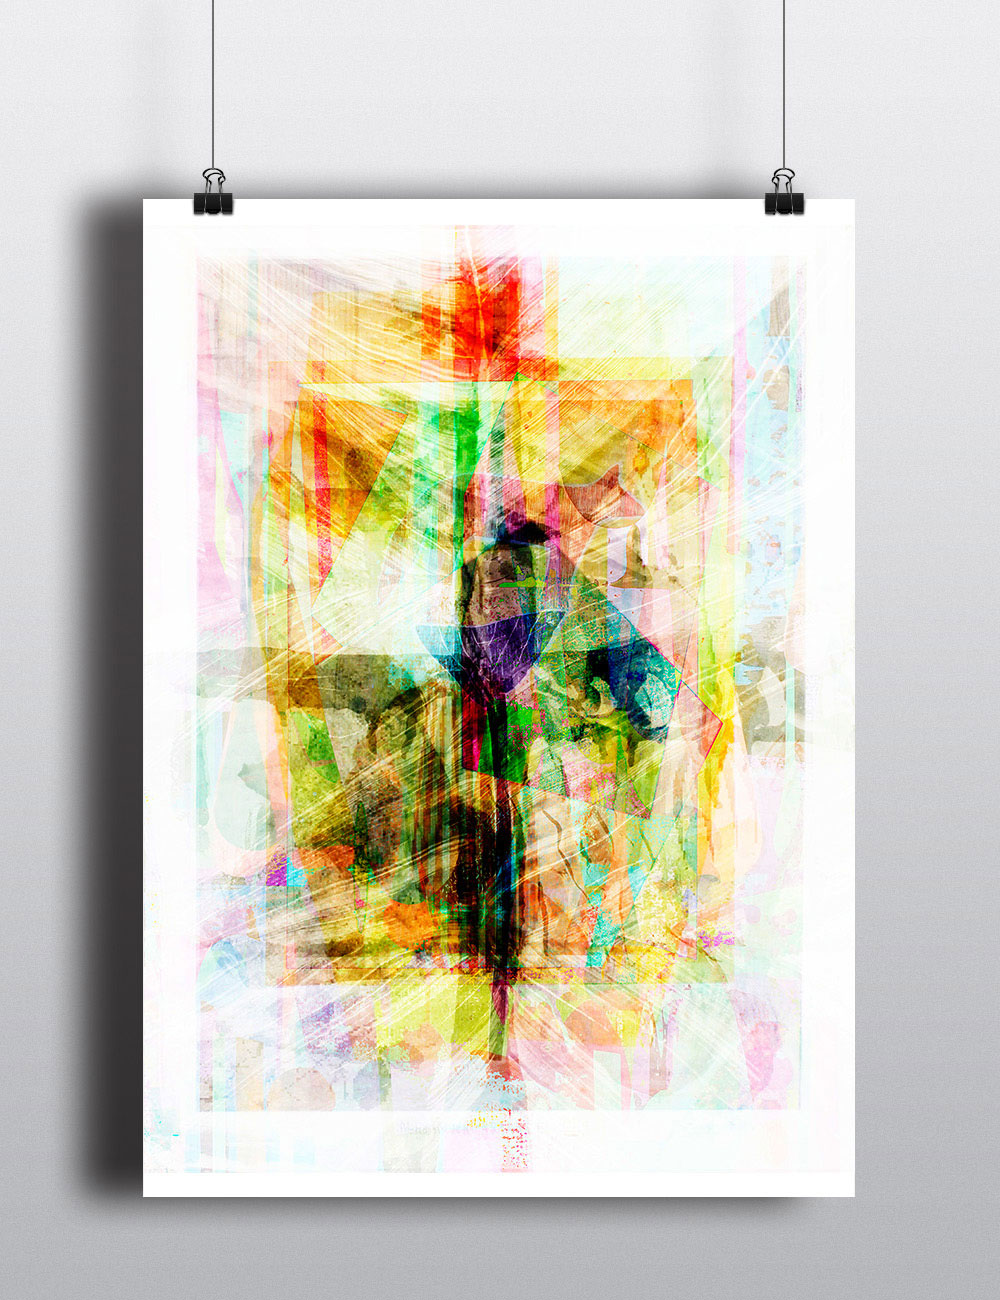 abstract digital works available as limited edition prints created from processing low resolution photos of other artists limited edition prints